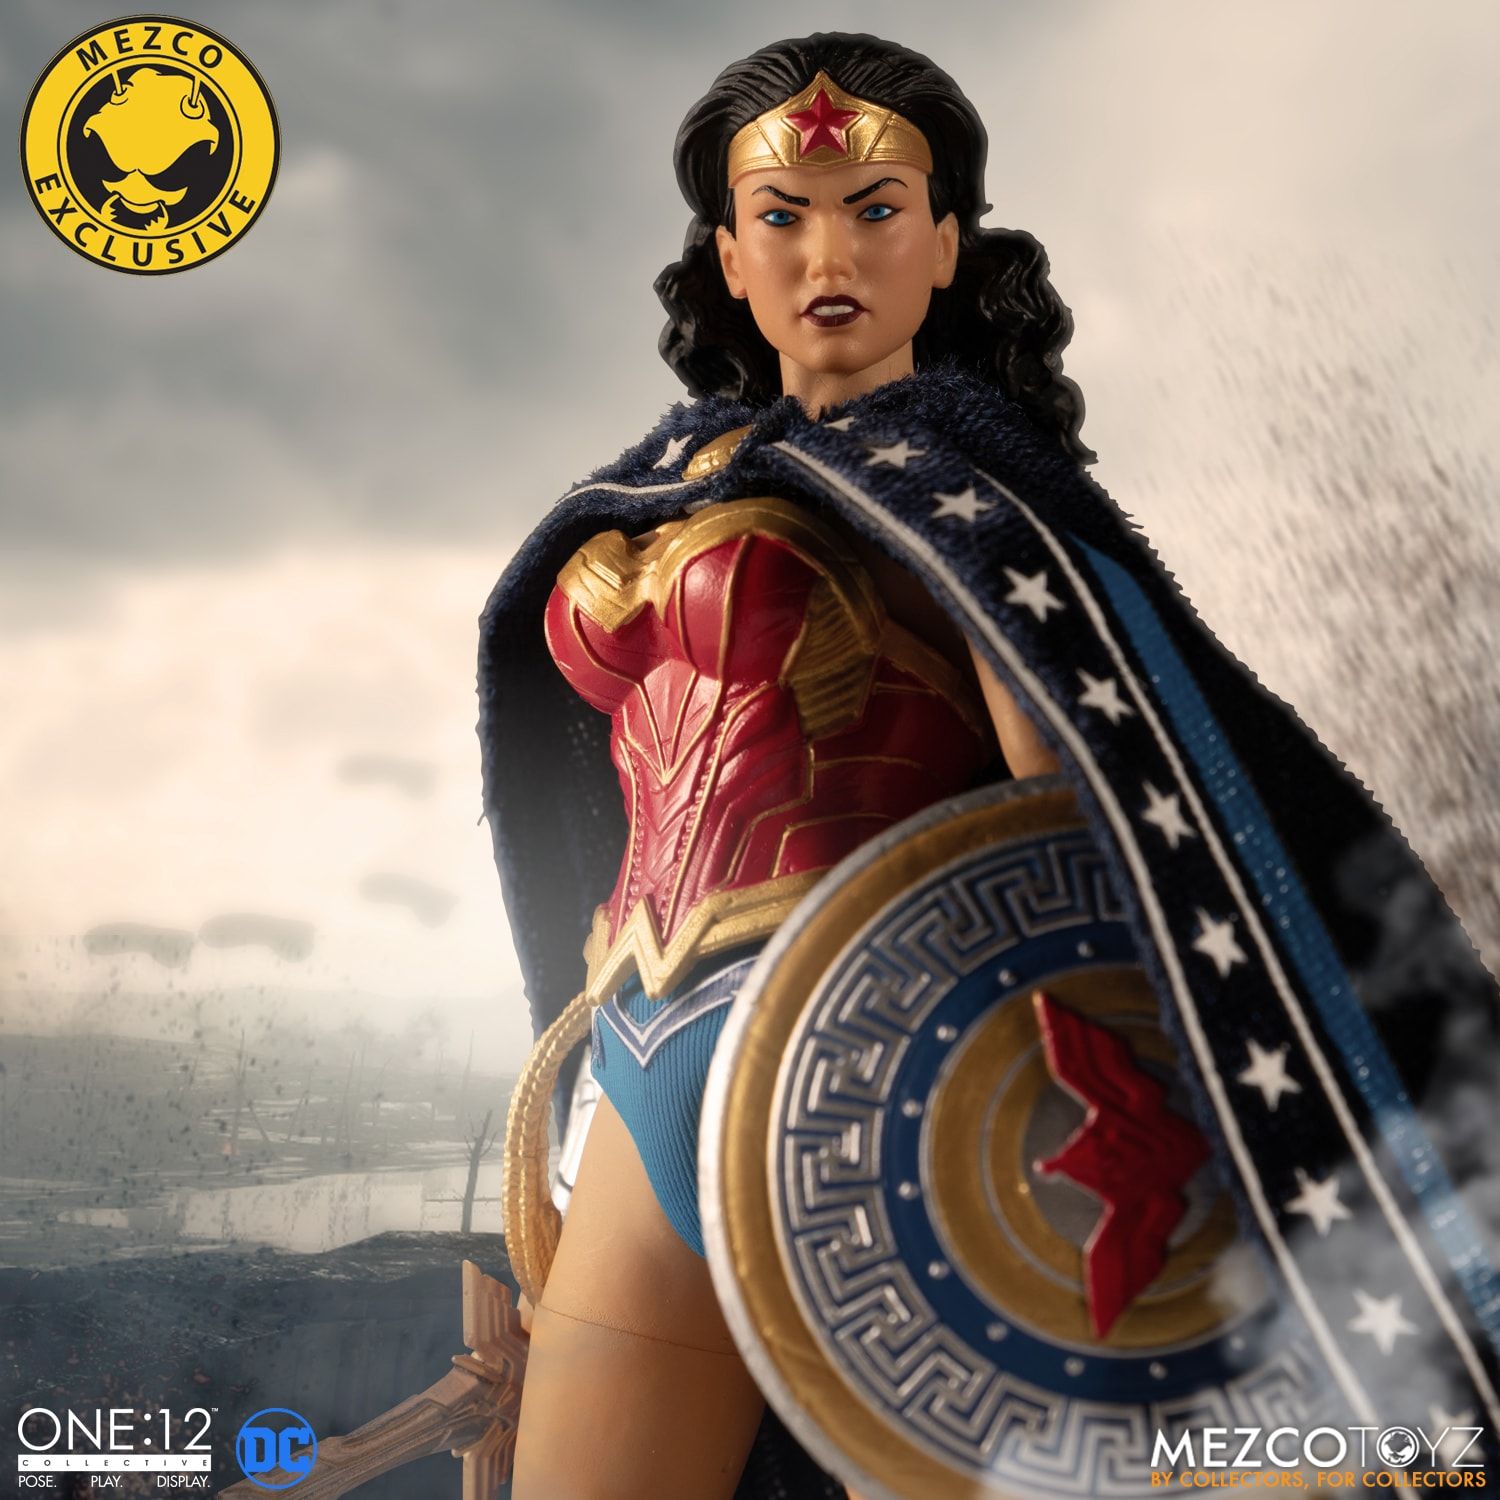 Mezco One:12 WONDER WOMAN HEAD SCULPT WITH CLOSED MOUTH 